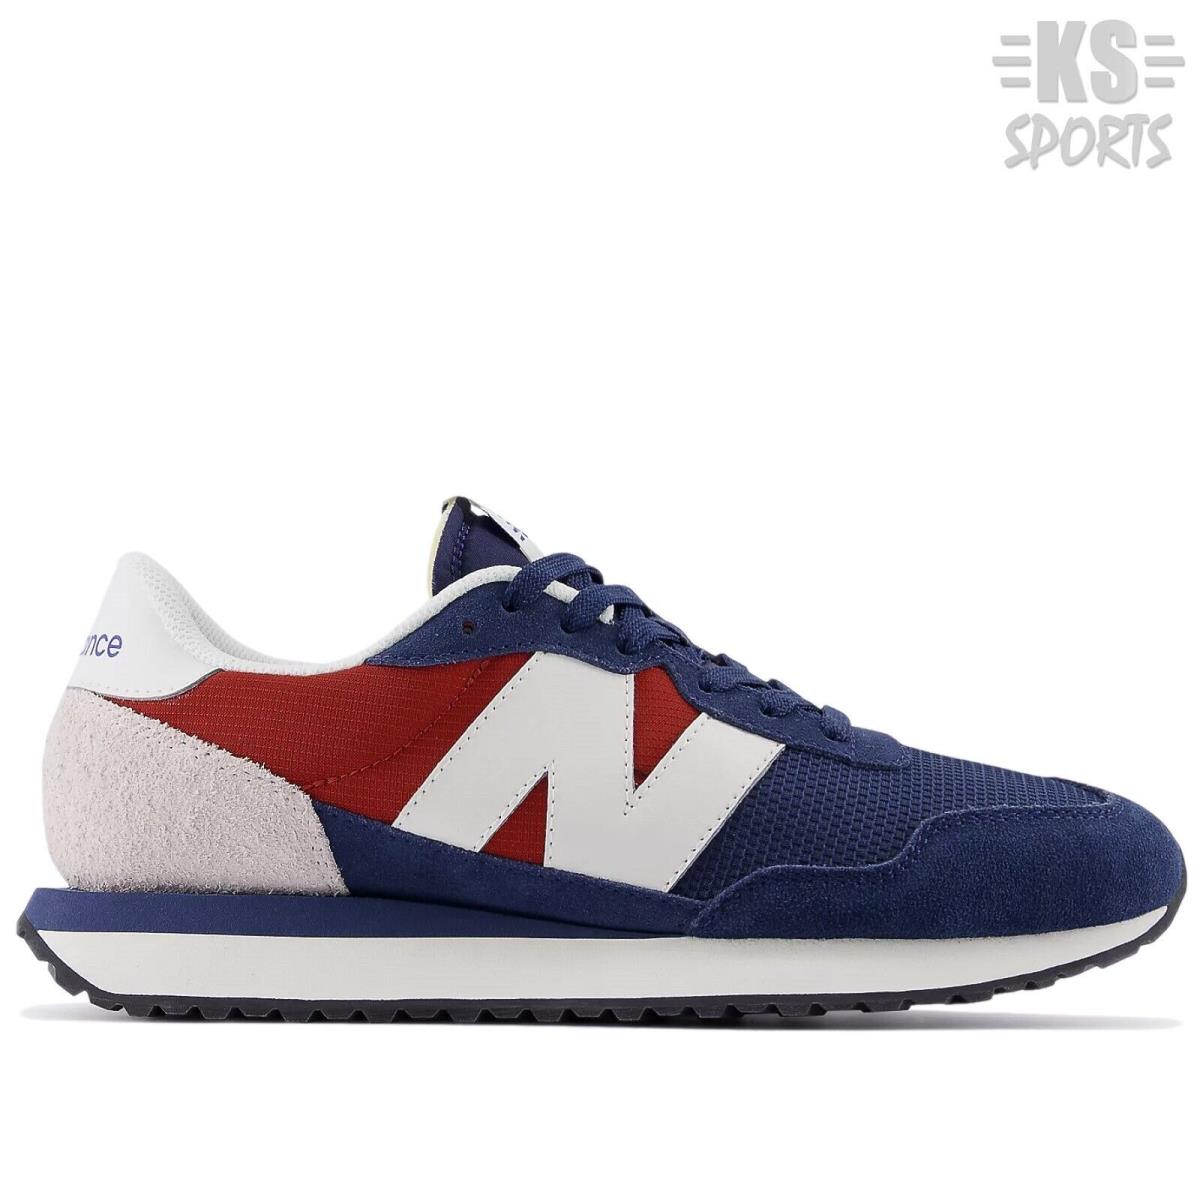 New Balance 237 `navy Brick Red` Men`s Lifestyle Athletic Shoes MS237TR - Navy/Brick Red/White